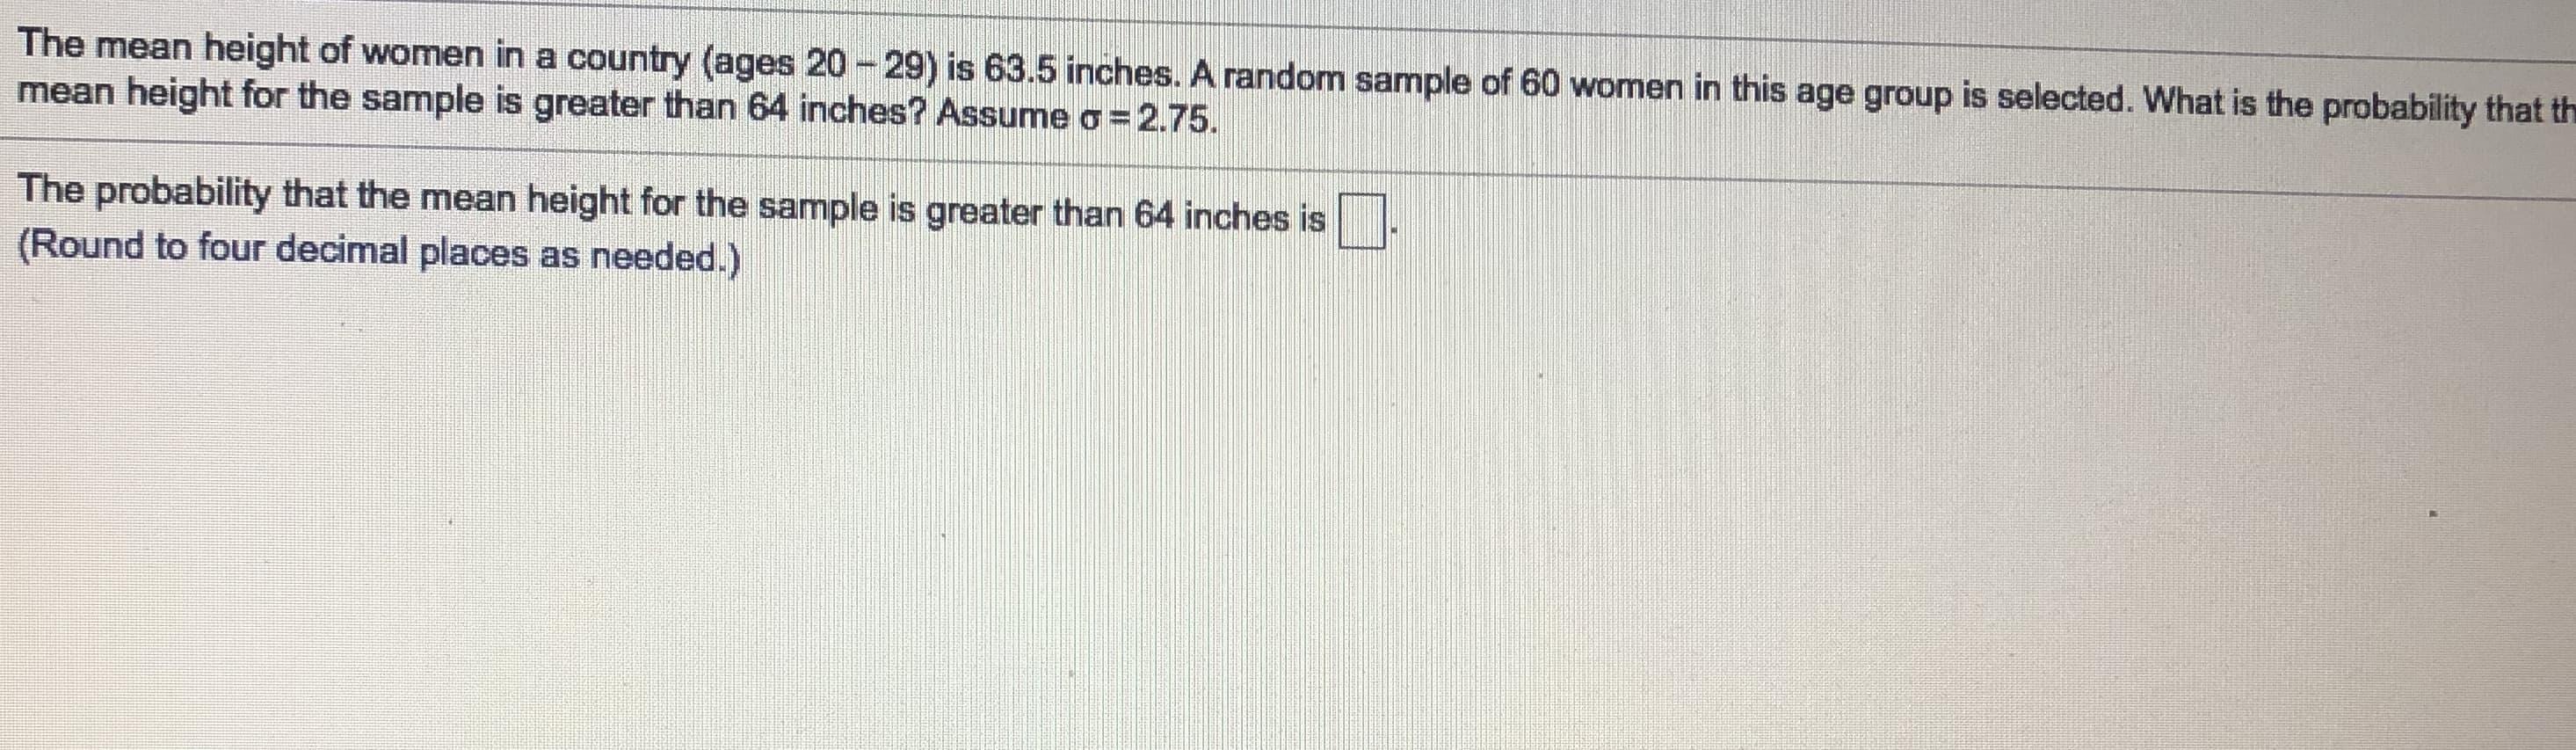 The mean height of women in a country (ages 20 - 29) is 63.5 inches. A random sample of 60 women in this age group is selected. What is the probability that th
mean height for the sample is greater than 64 inches? Assume o= 2.75.
The probability that the mean height for the sample is greater than 64 inches is
(Round to four decimal places as needed.)
